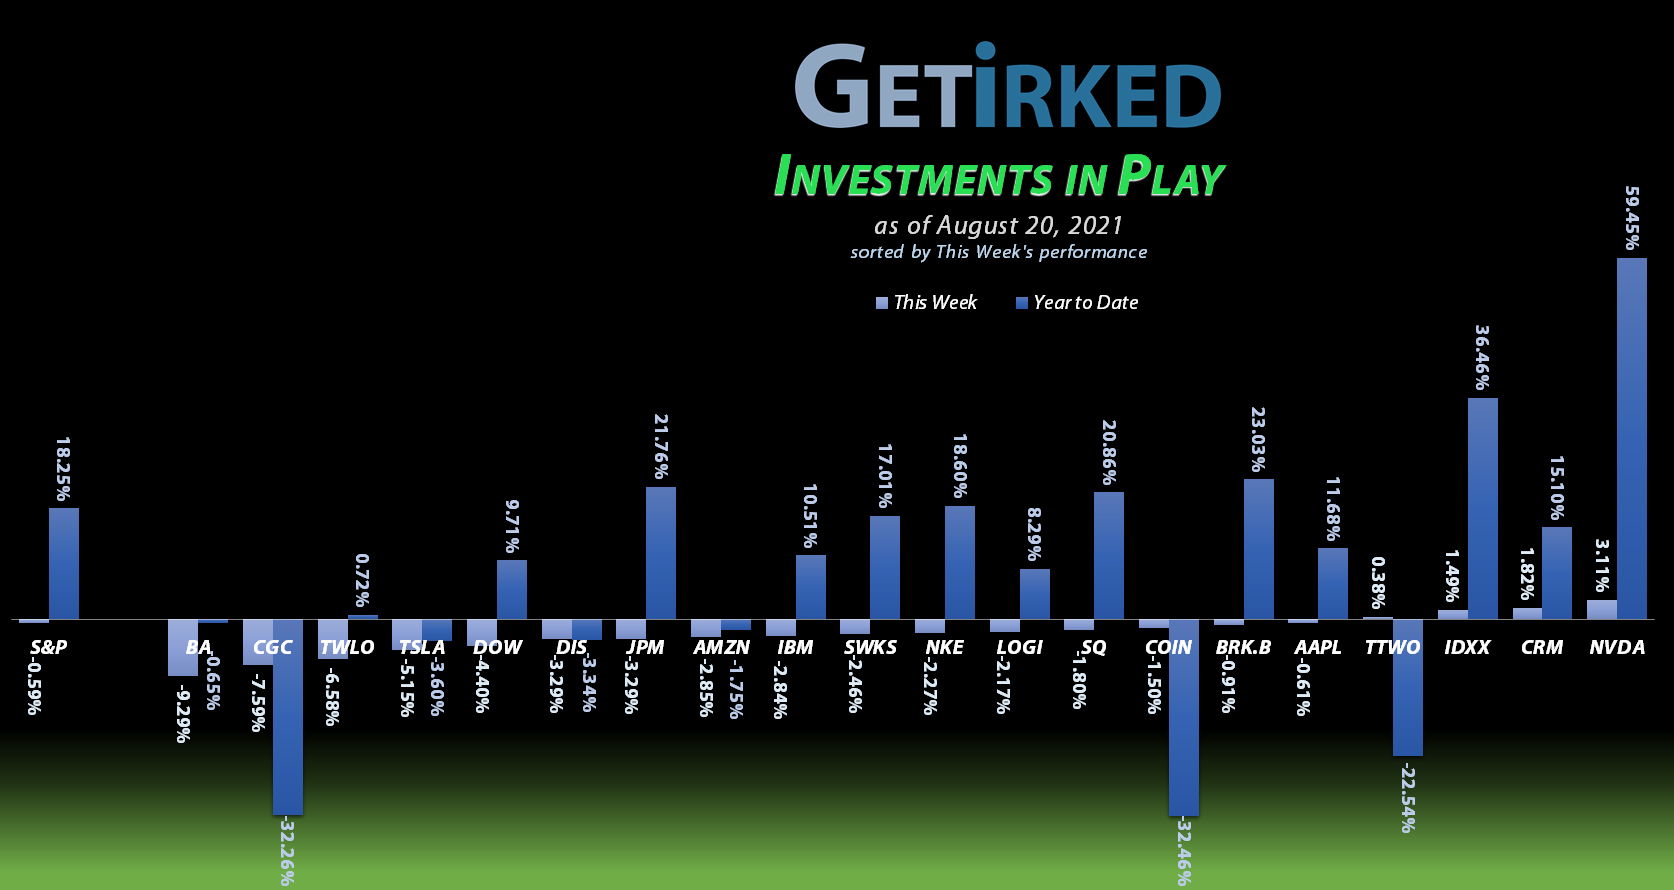 Get Irked - Investments in Play - August 20, 2021